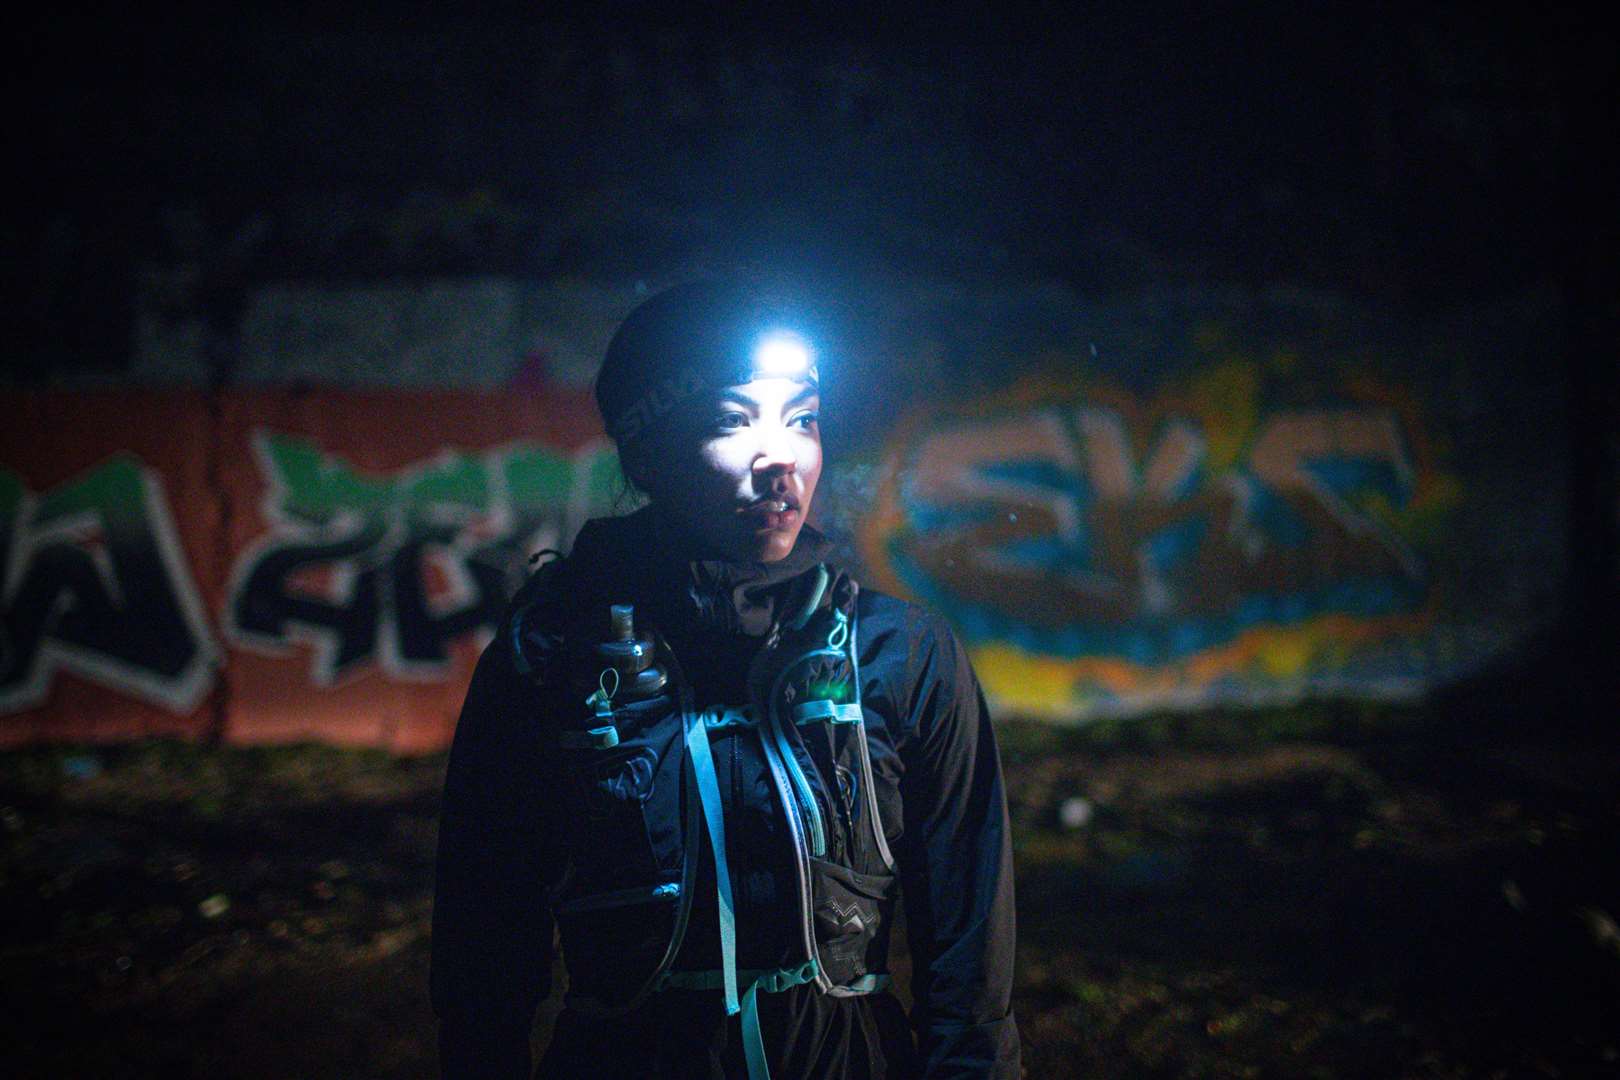 A head torch can be a good idea when out in winter.